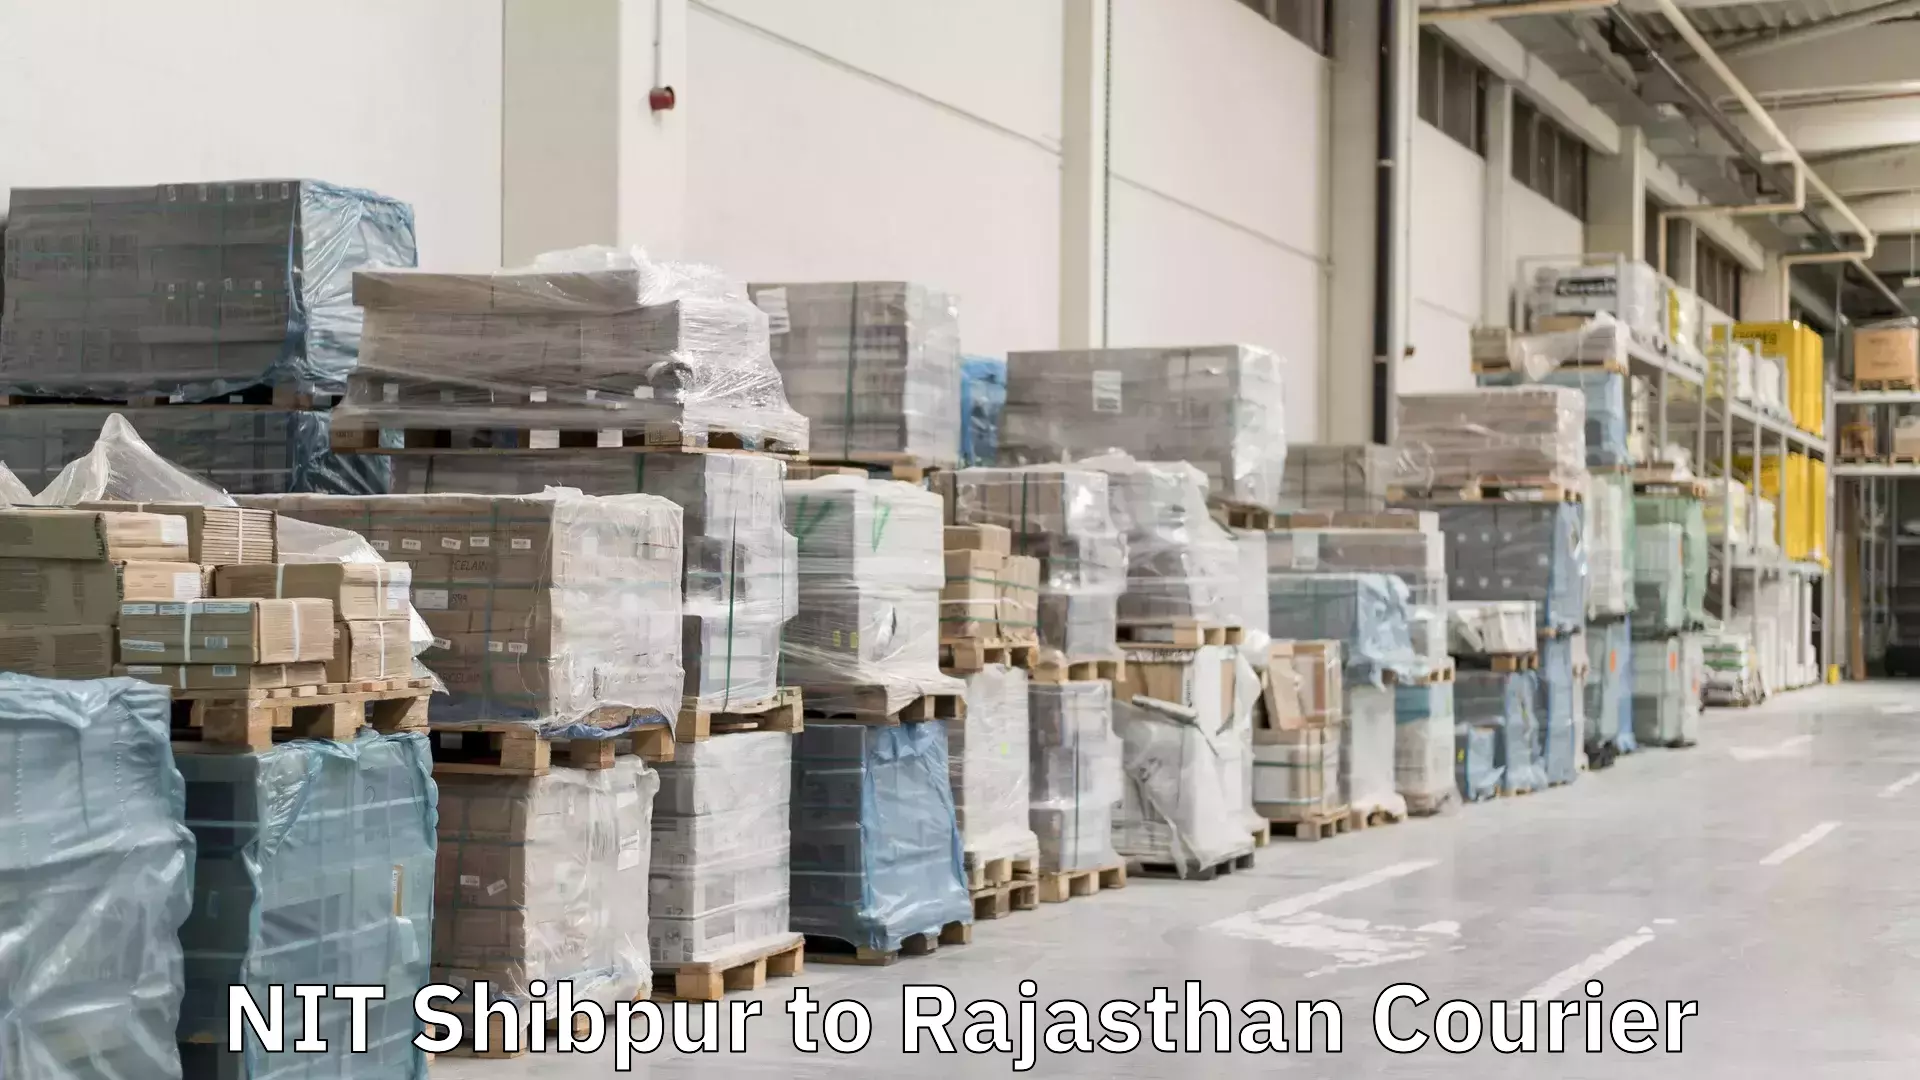 International courier networks NIT Shibpur to Rajasthan